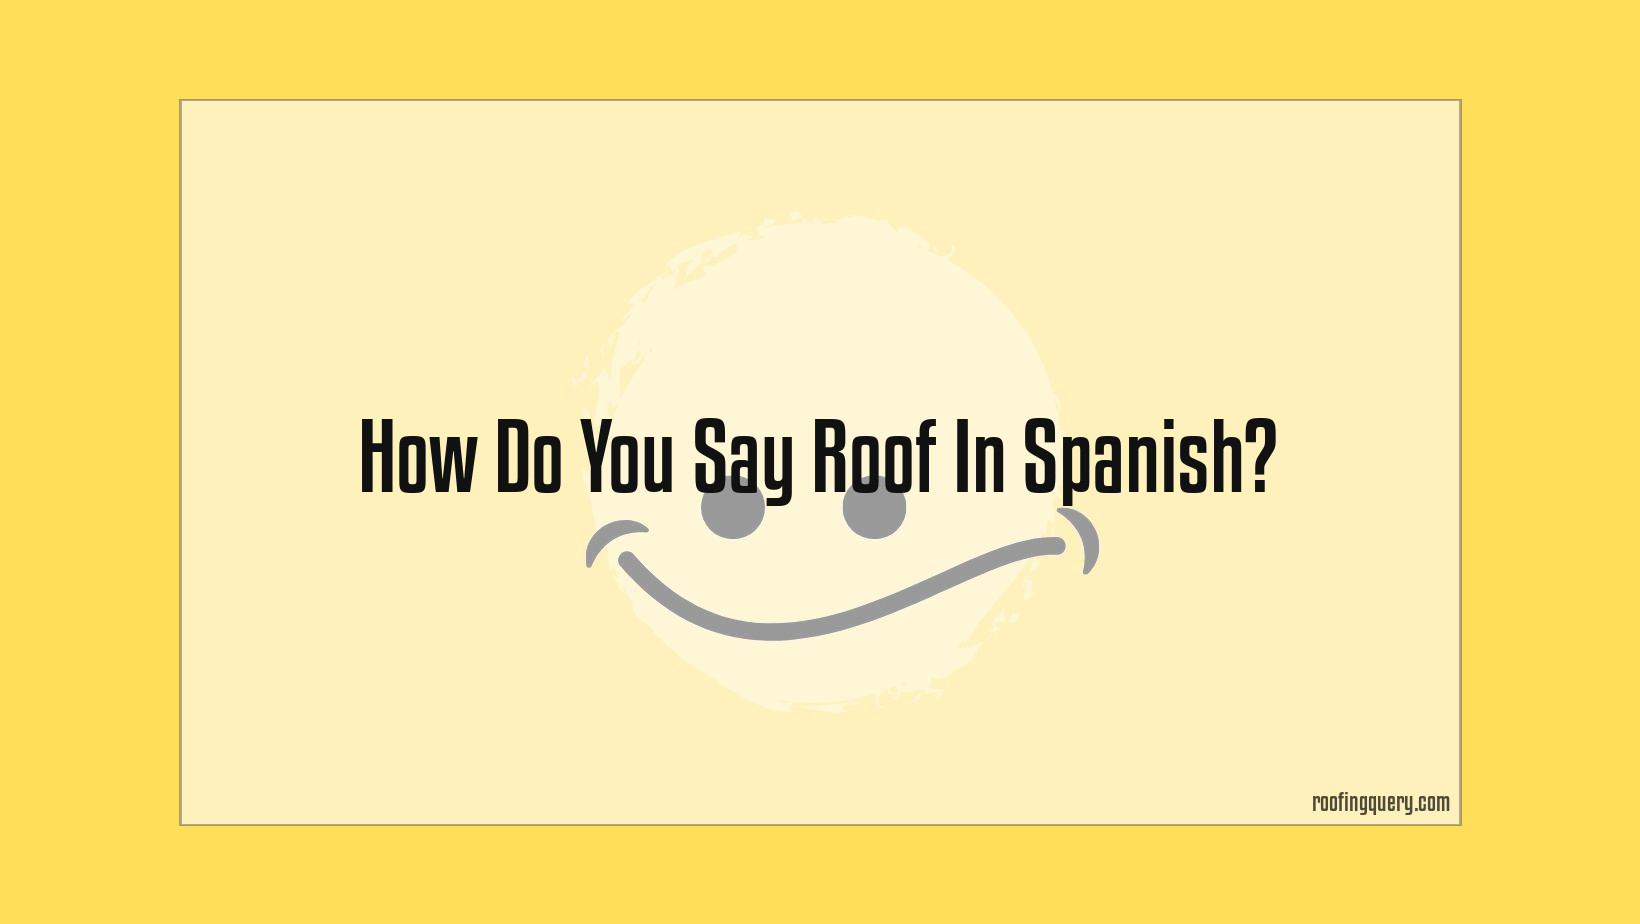 How Do You Say Roof In Spanish?